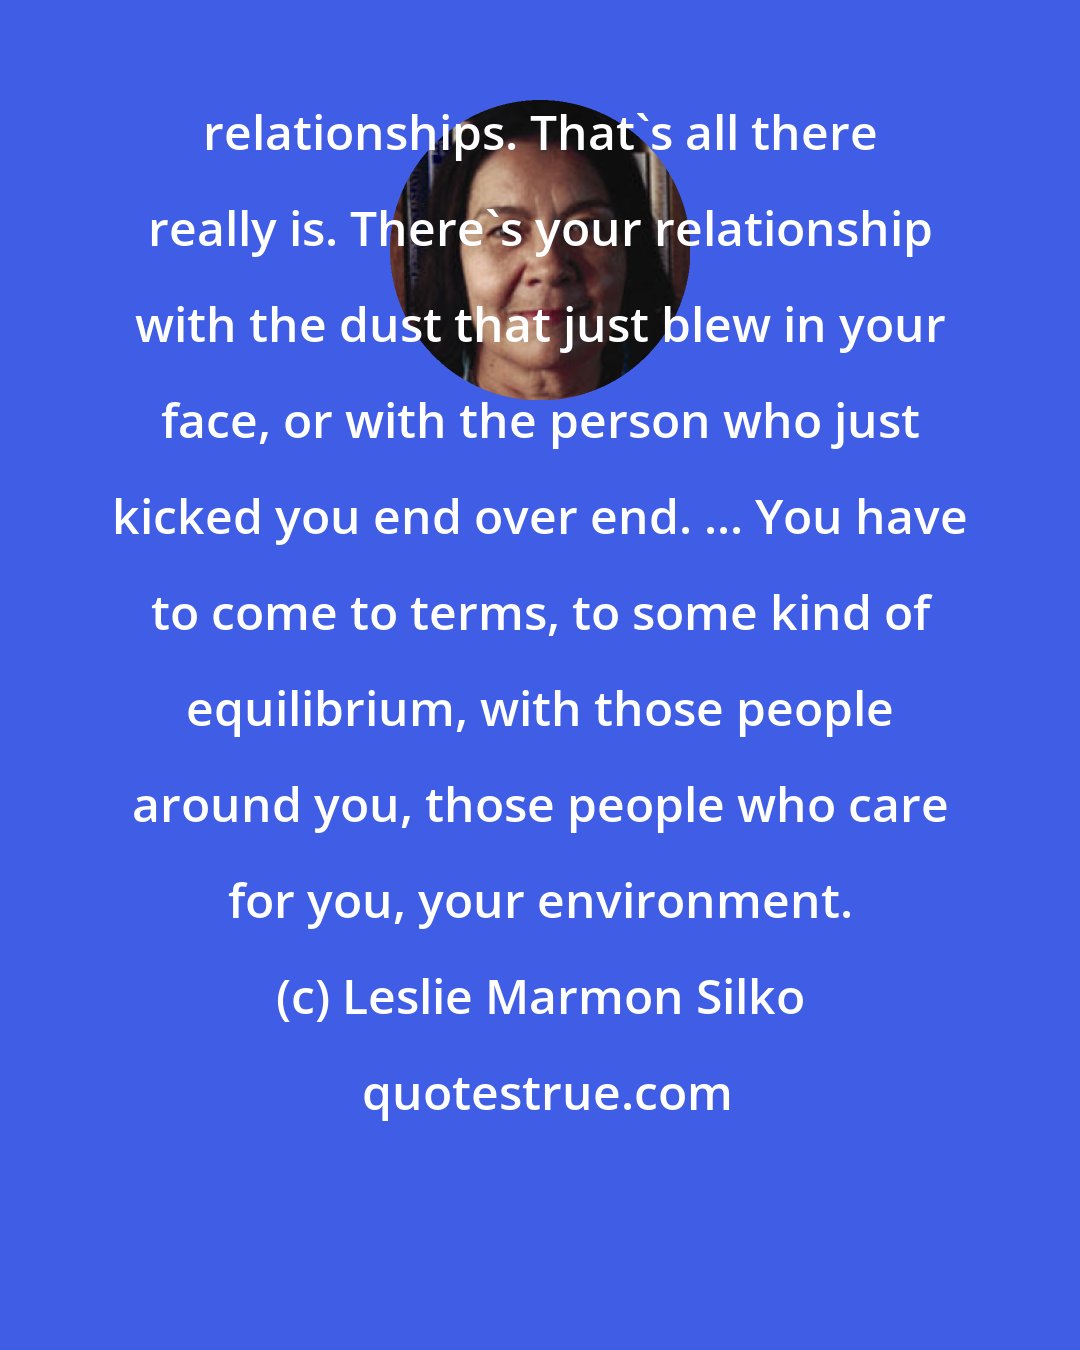 Leslie Marmon Silko: relationships. That's all there really is. There's your relationship with the dust that just blew in your face, or with the person who just kicked you end over end. ... You have to come to terms, to some kind of equilibrium, with those people around you, those people who care for you, your environment.